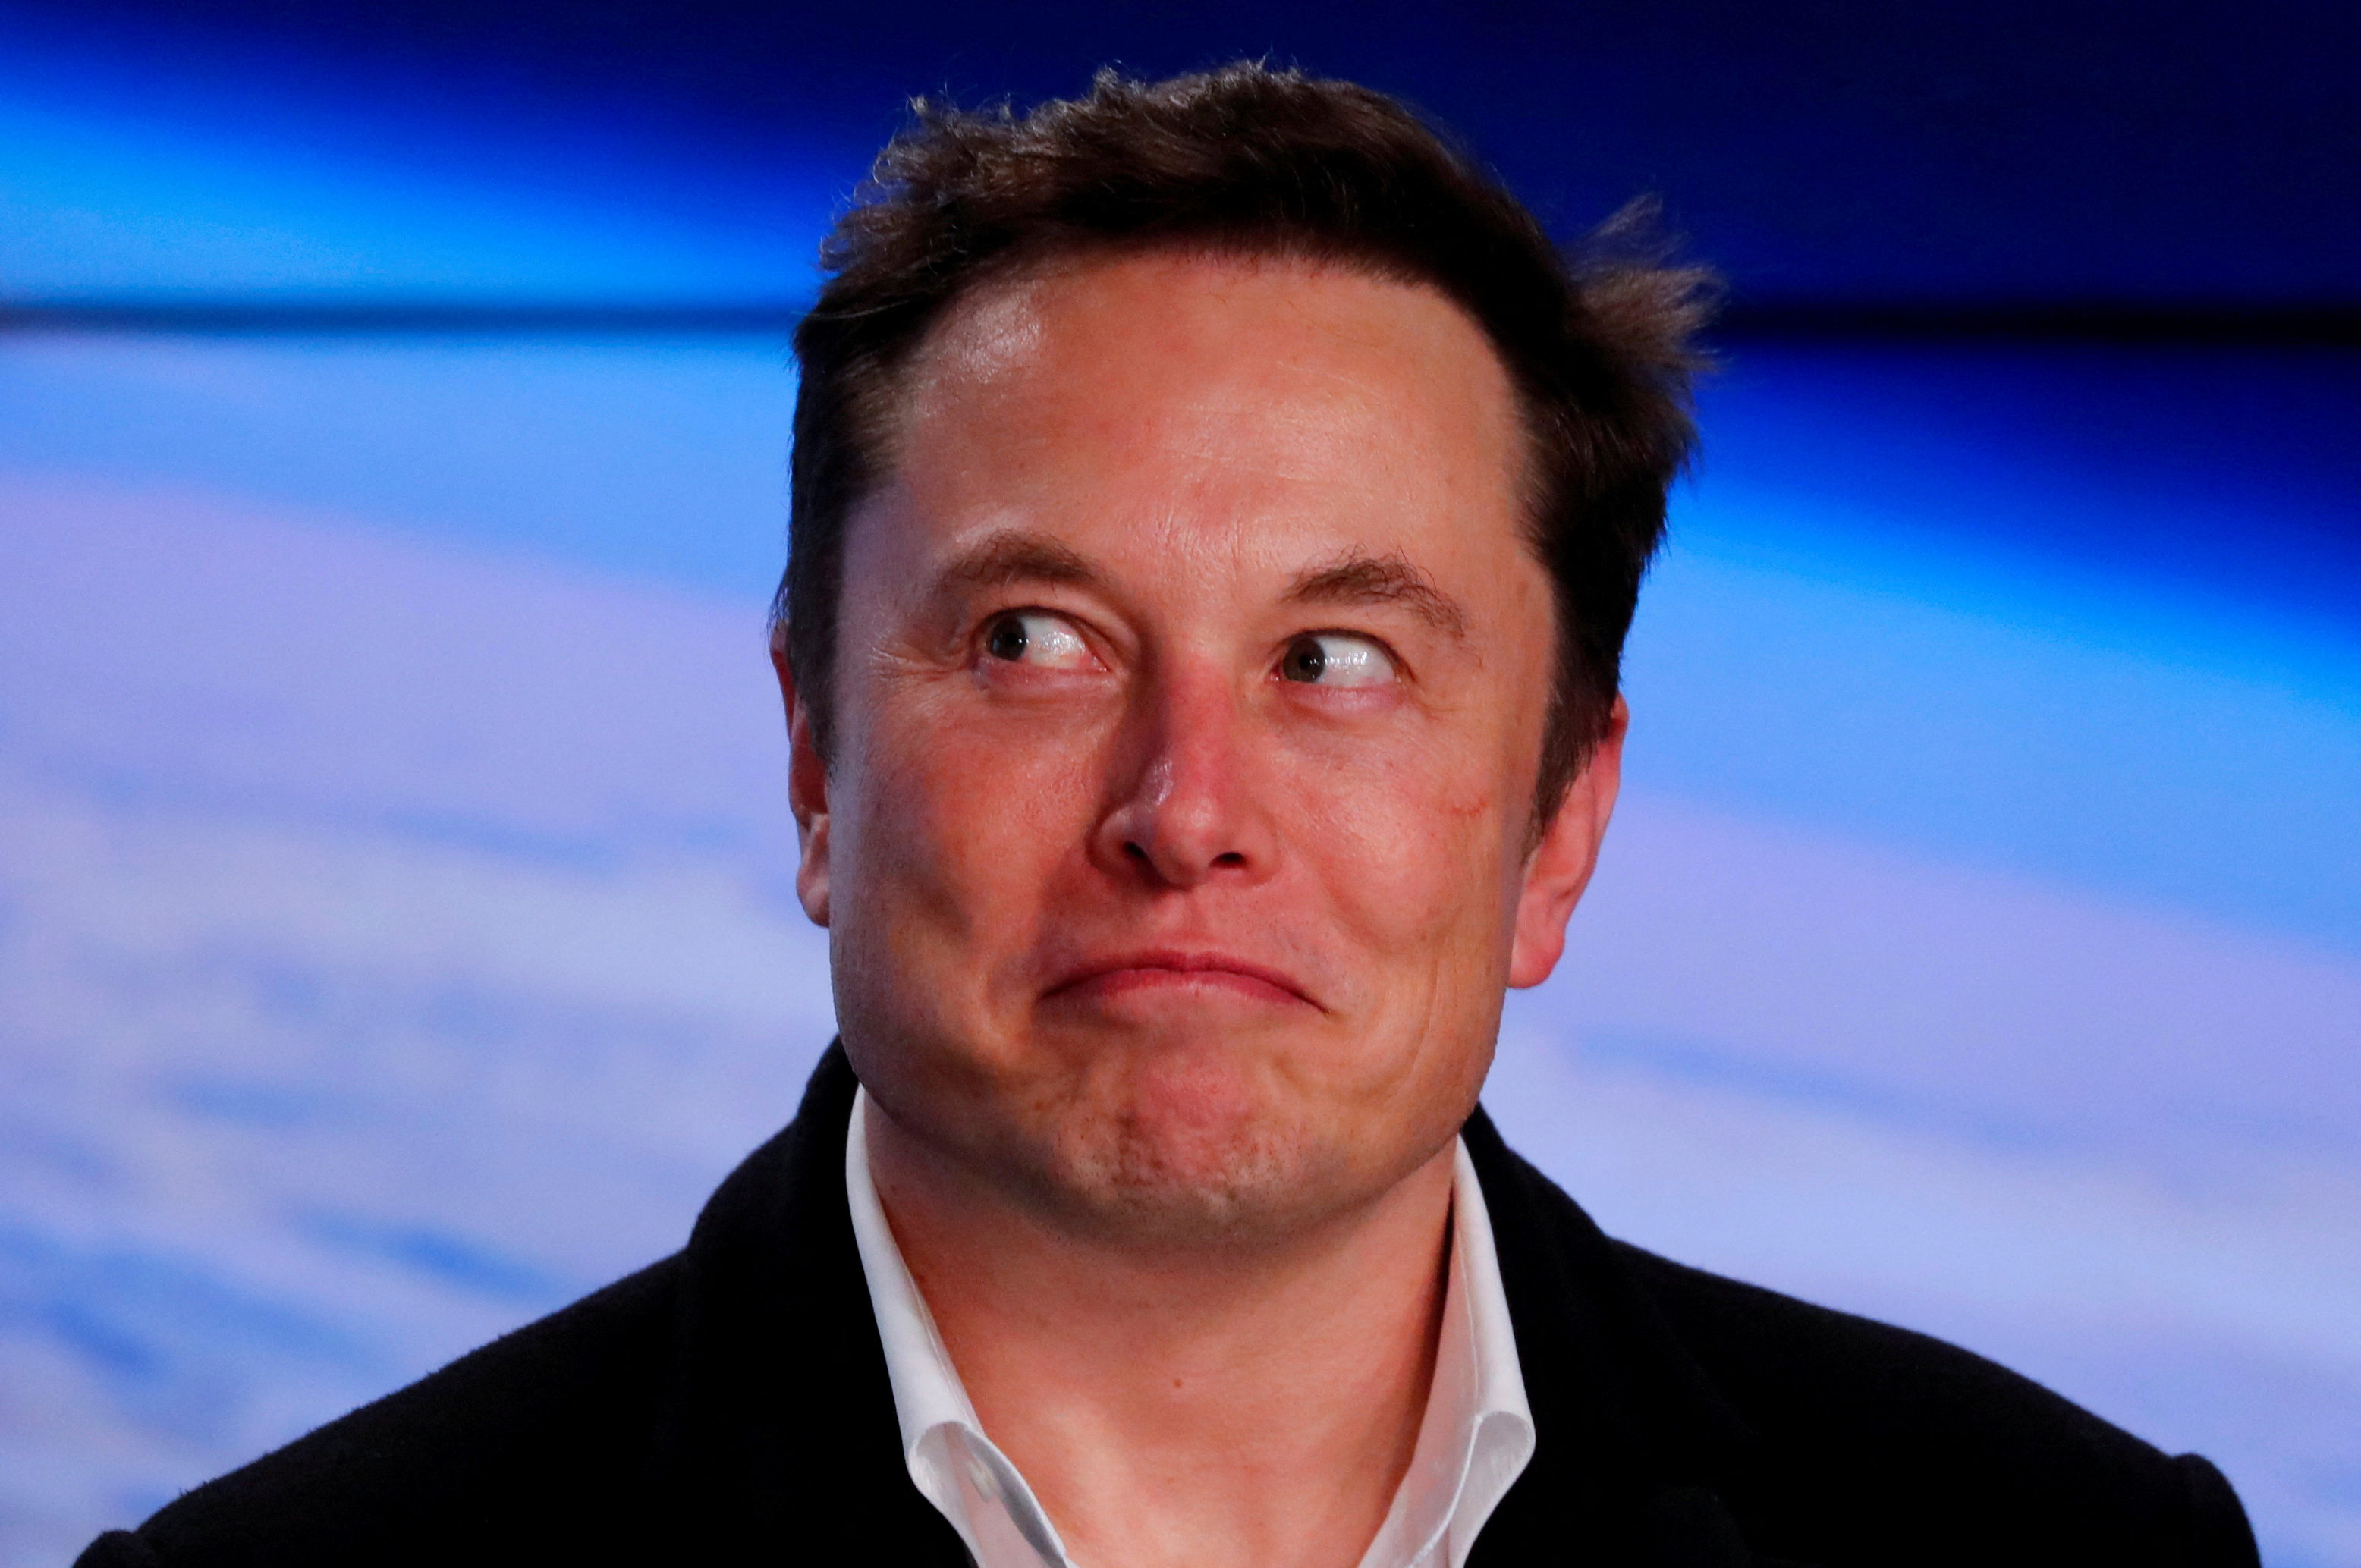 SpaceX founder Musk reacts at a post-launch news conference in Cape Canaveral